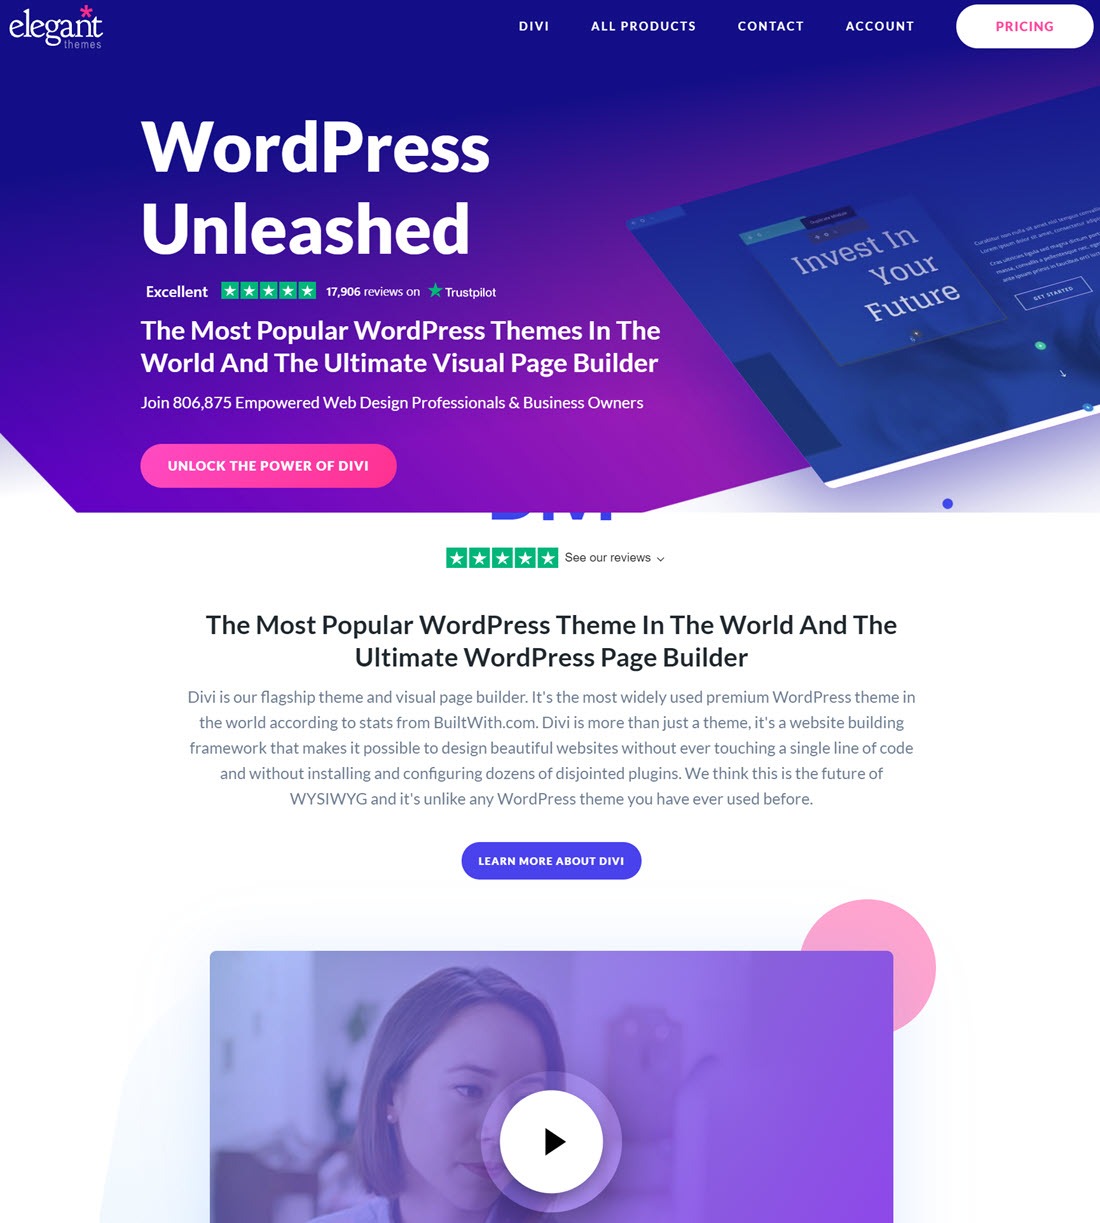 DIVI The Most Popular WordPress Theme In The World